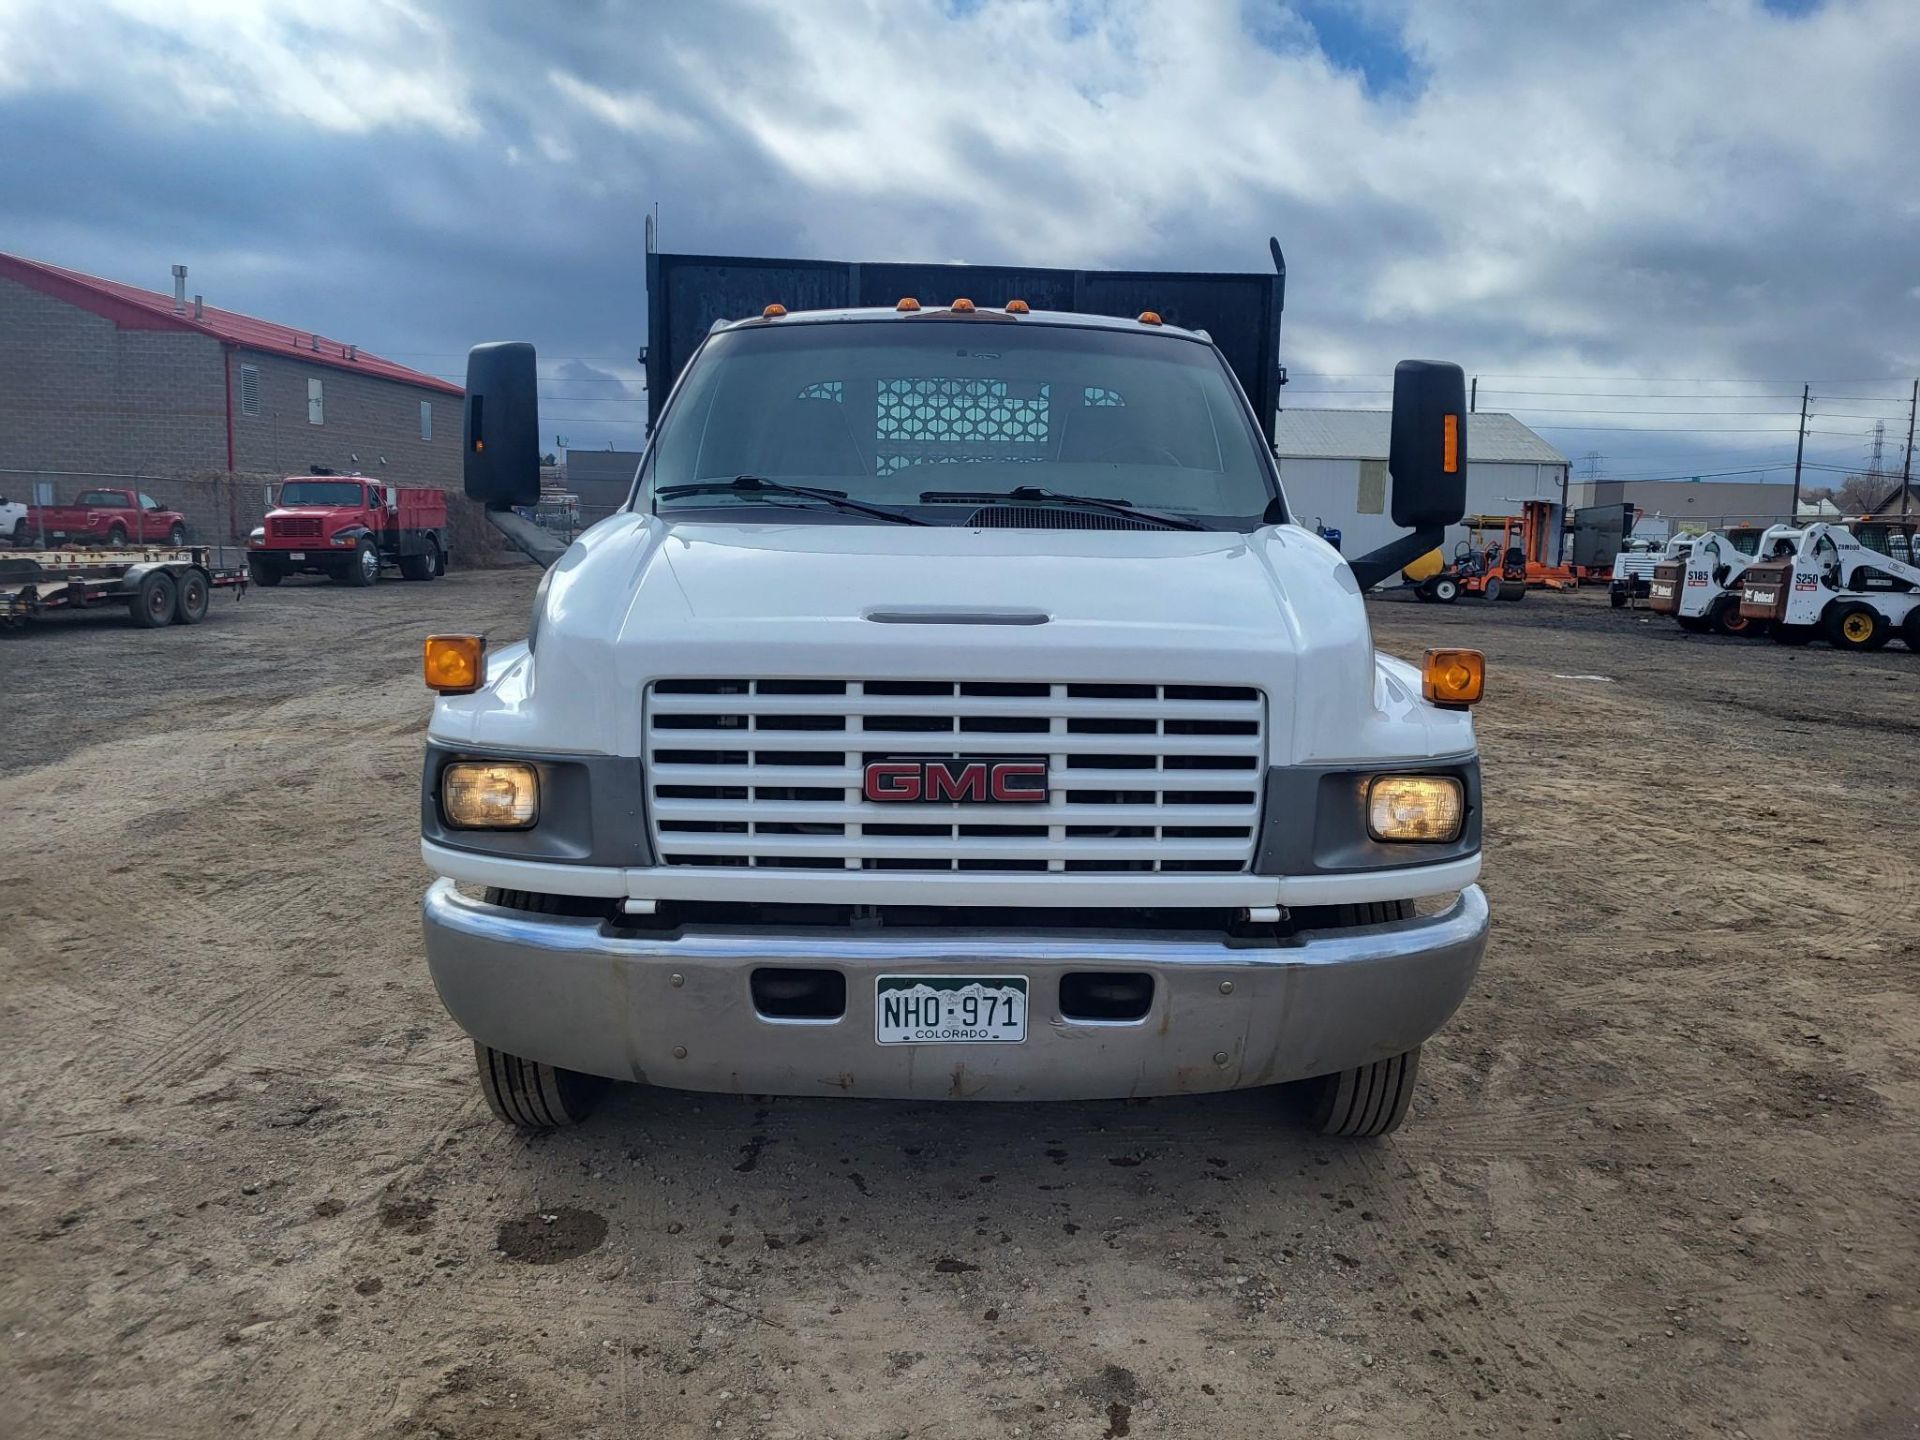 2004 GMC TOPKICK C6500 22' STAKE BED TRUCK - Image 2 of 17